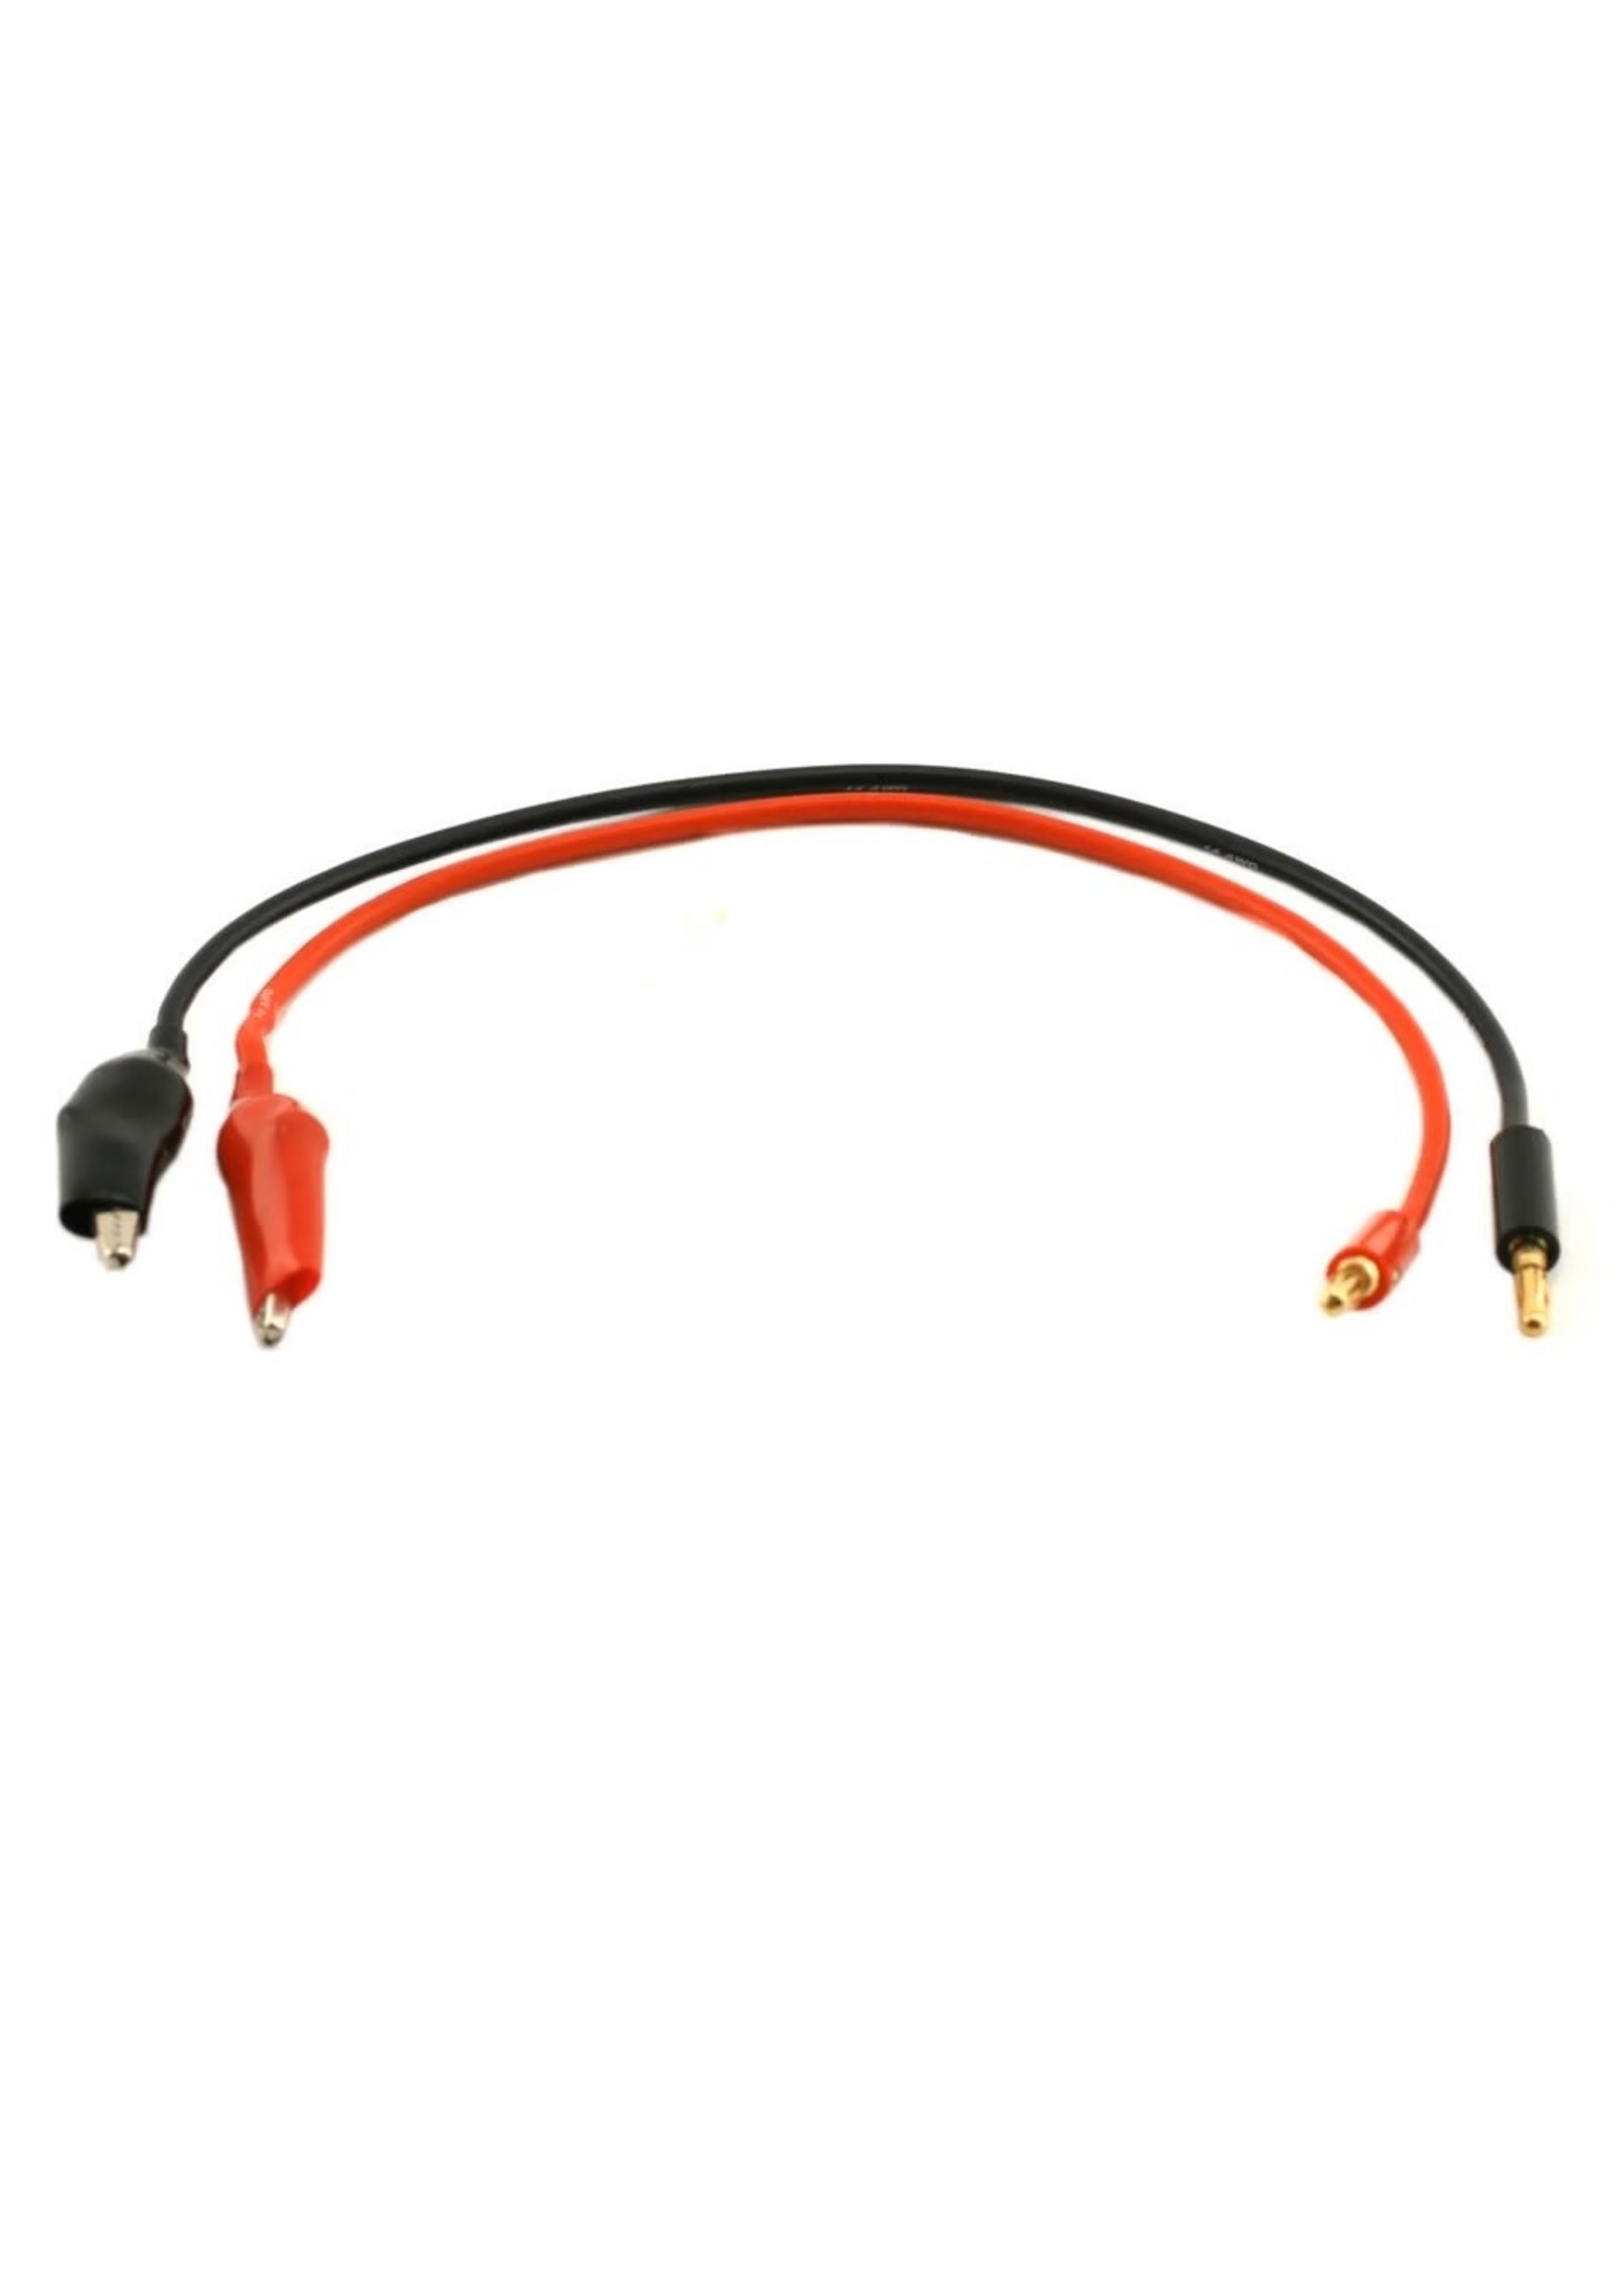 ProTek RC ProTek RC Heavy Duty (14awg) Charge Lead (Alligator Clips to 4mm Banana Plugs)